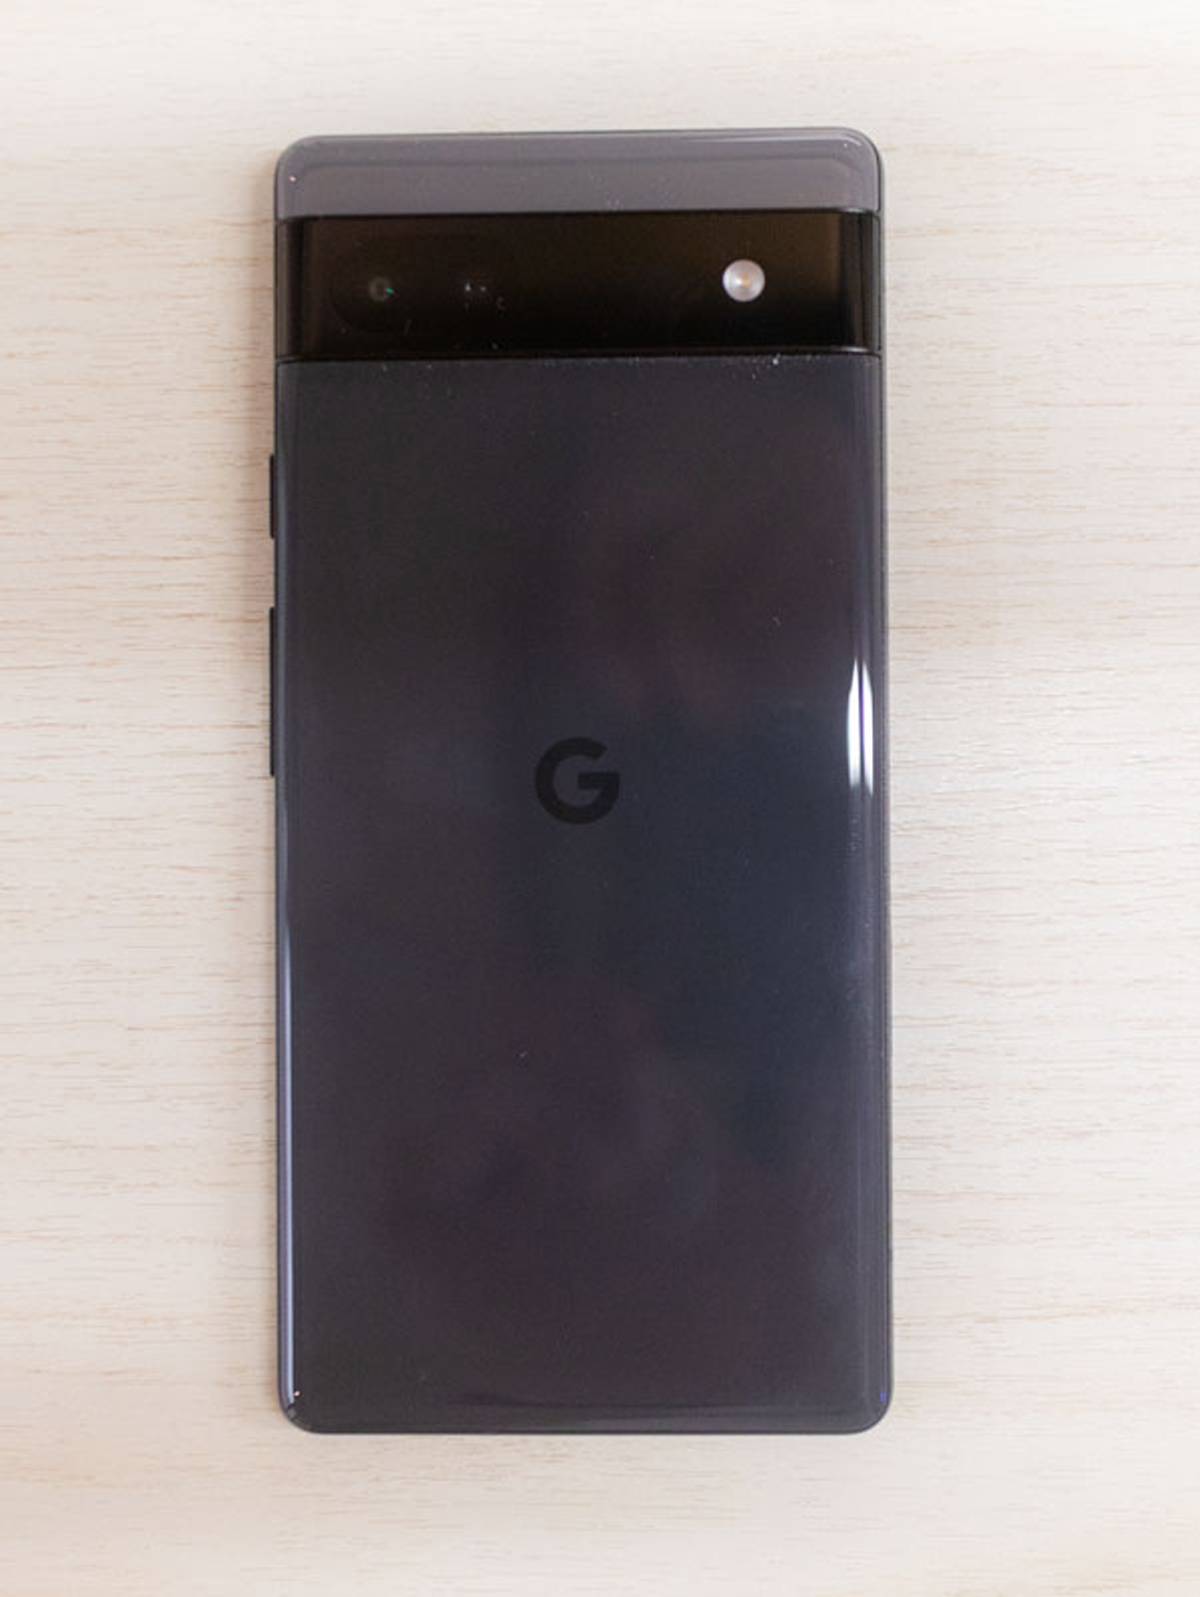 Looks like a glass back, but no, it’s just a “3D thermoformed composite back”, i.e. plastic. Though not as premium in feel, it's probably more durable by virtue of the material and it looks just as good as the Pixel 6.